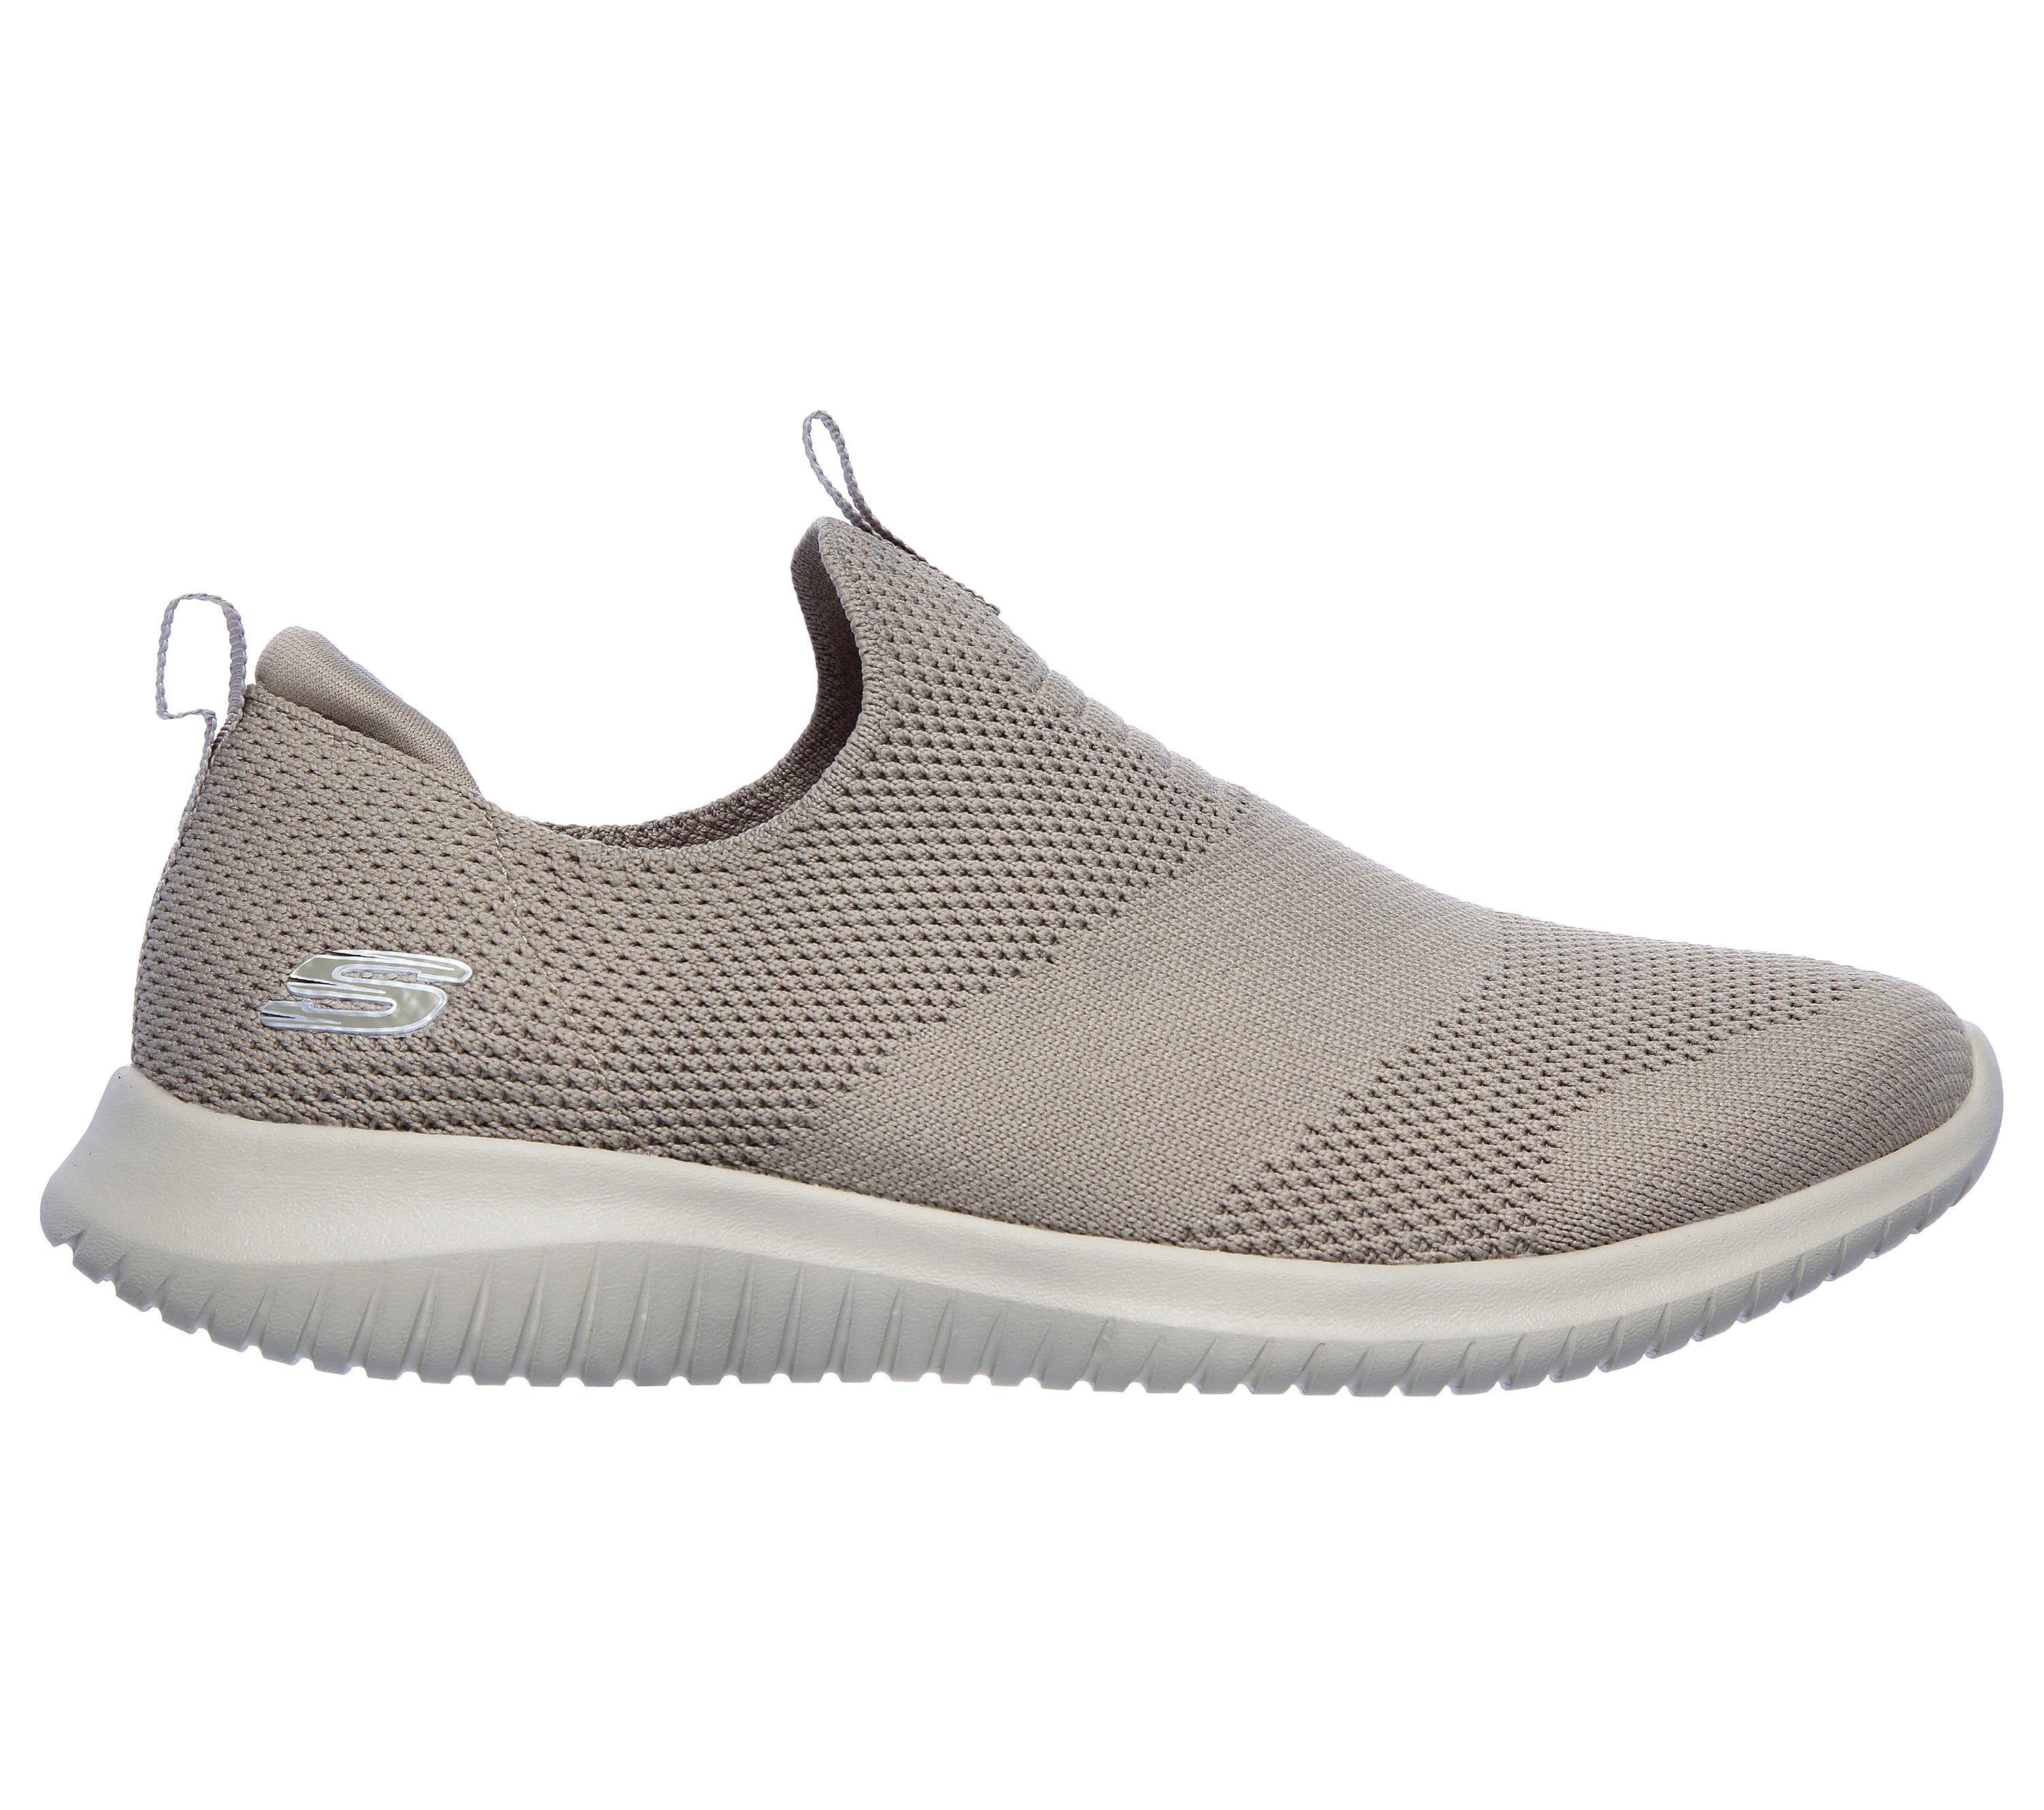 where can i buy skechers stretch knit shoes